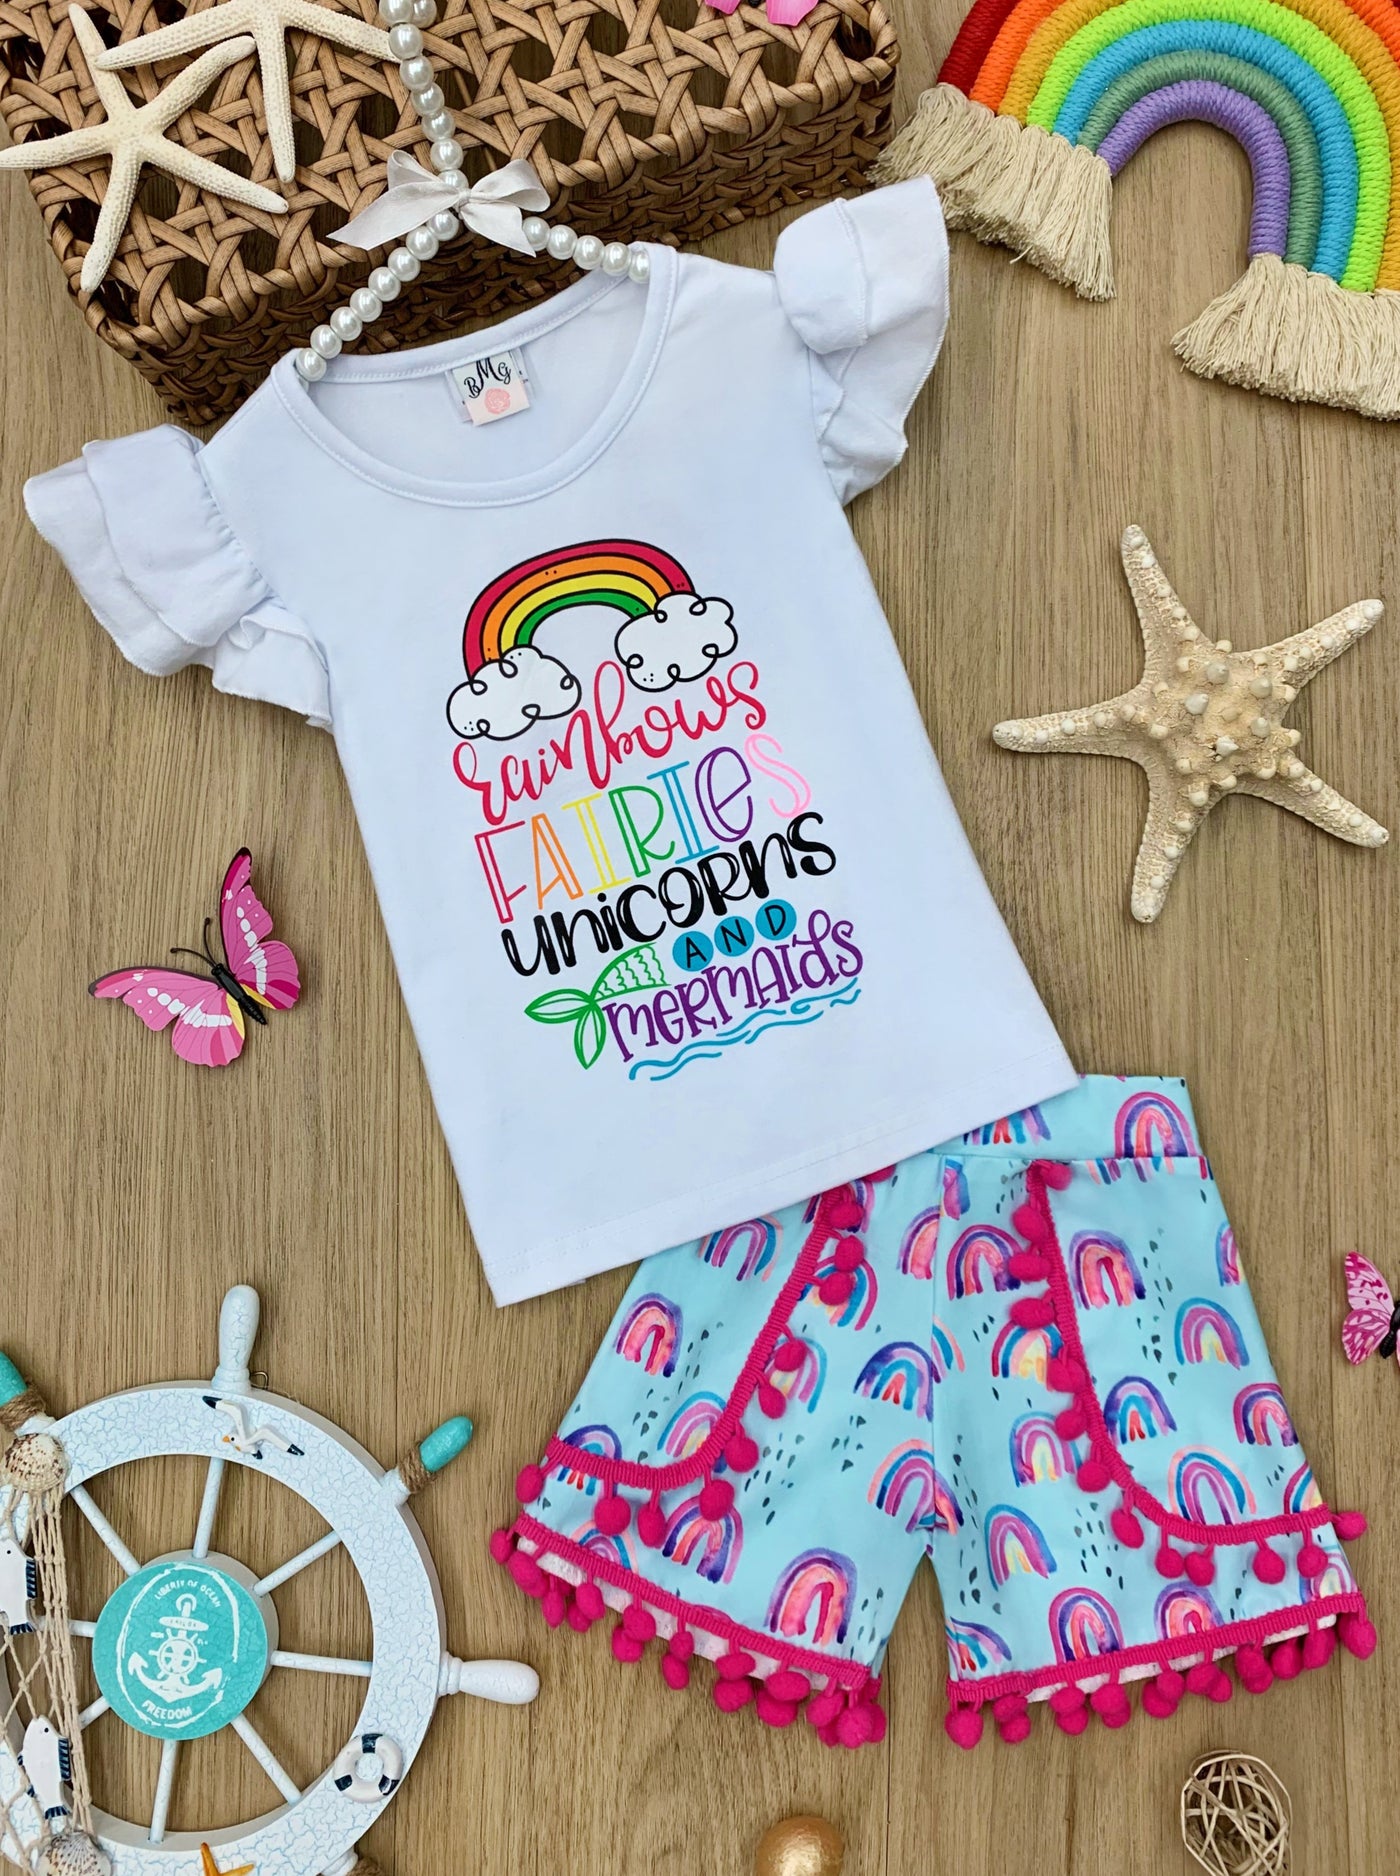 girls ruffled top with rainbows fairies uniconrs and mermaids graphic top and shorts with tassels 2T-10Y